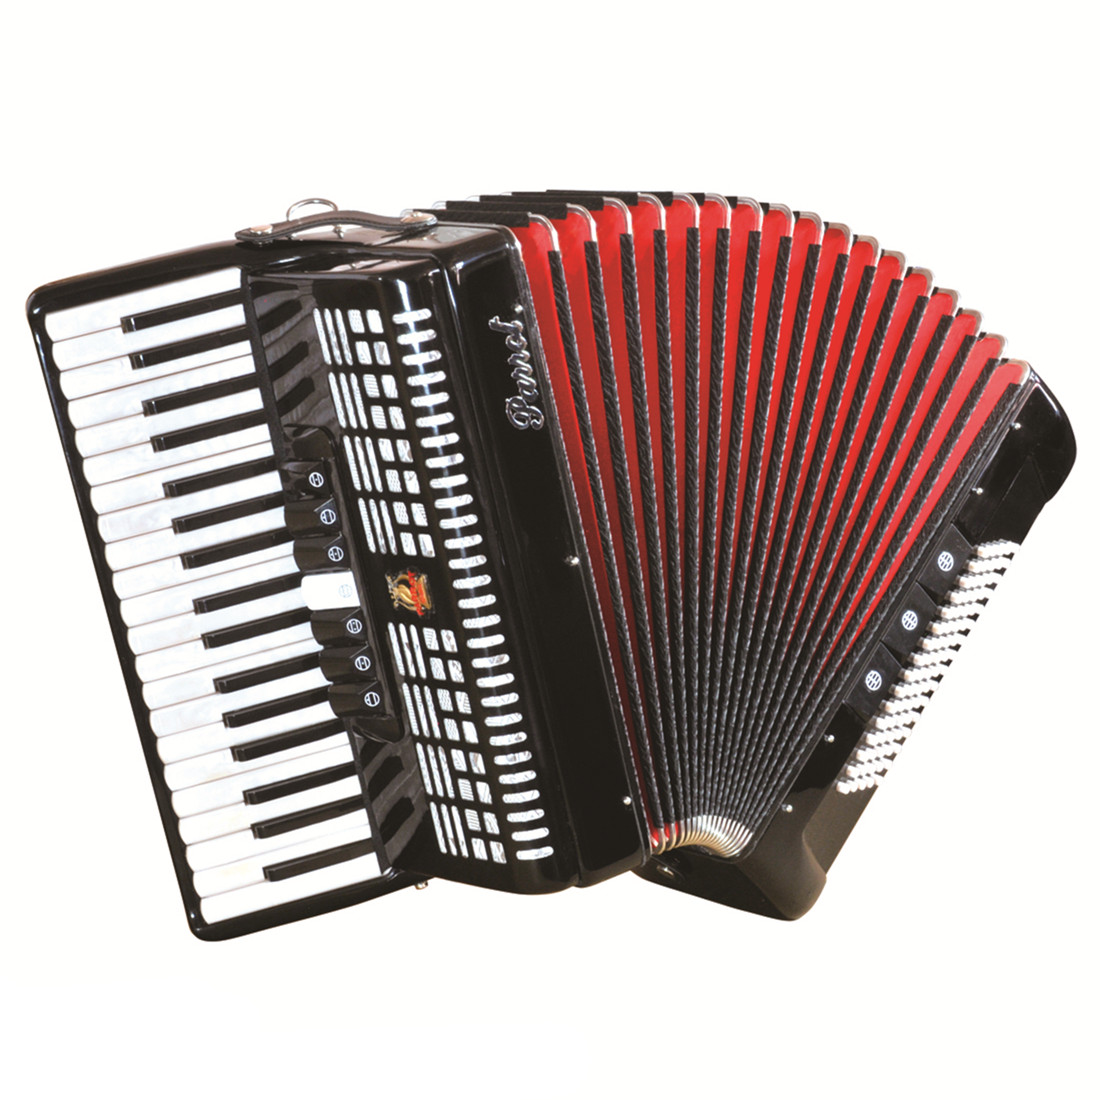 Parrot 34 Keys 80 Bass Piano Accordion With Case And Straps